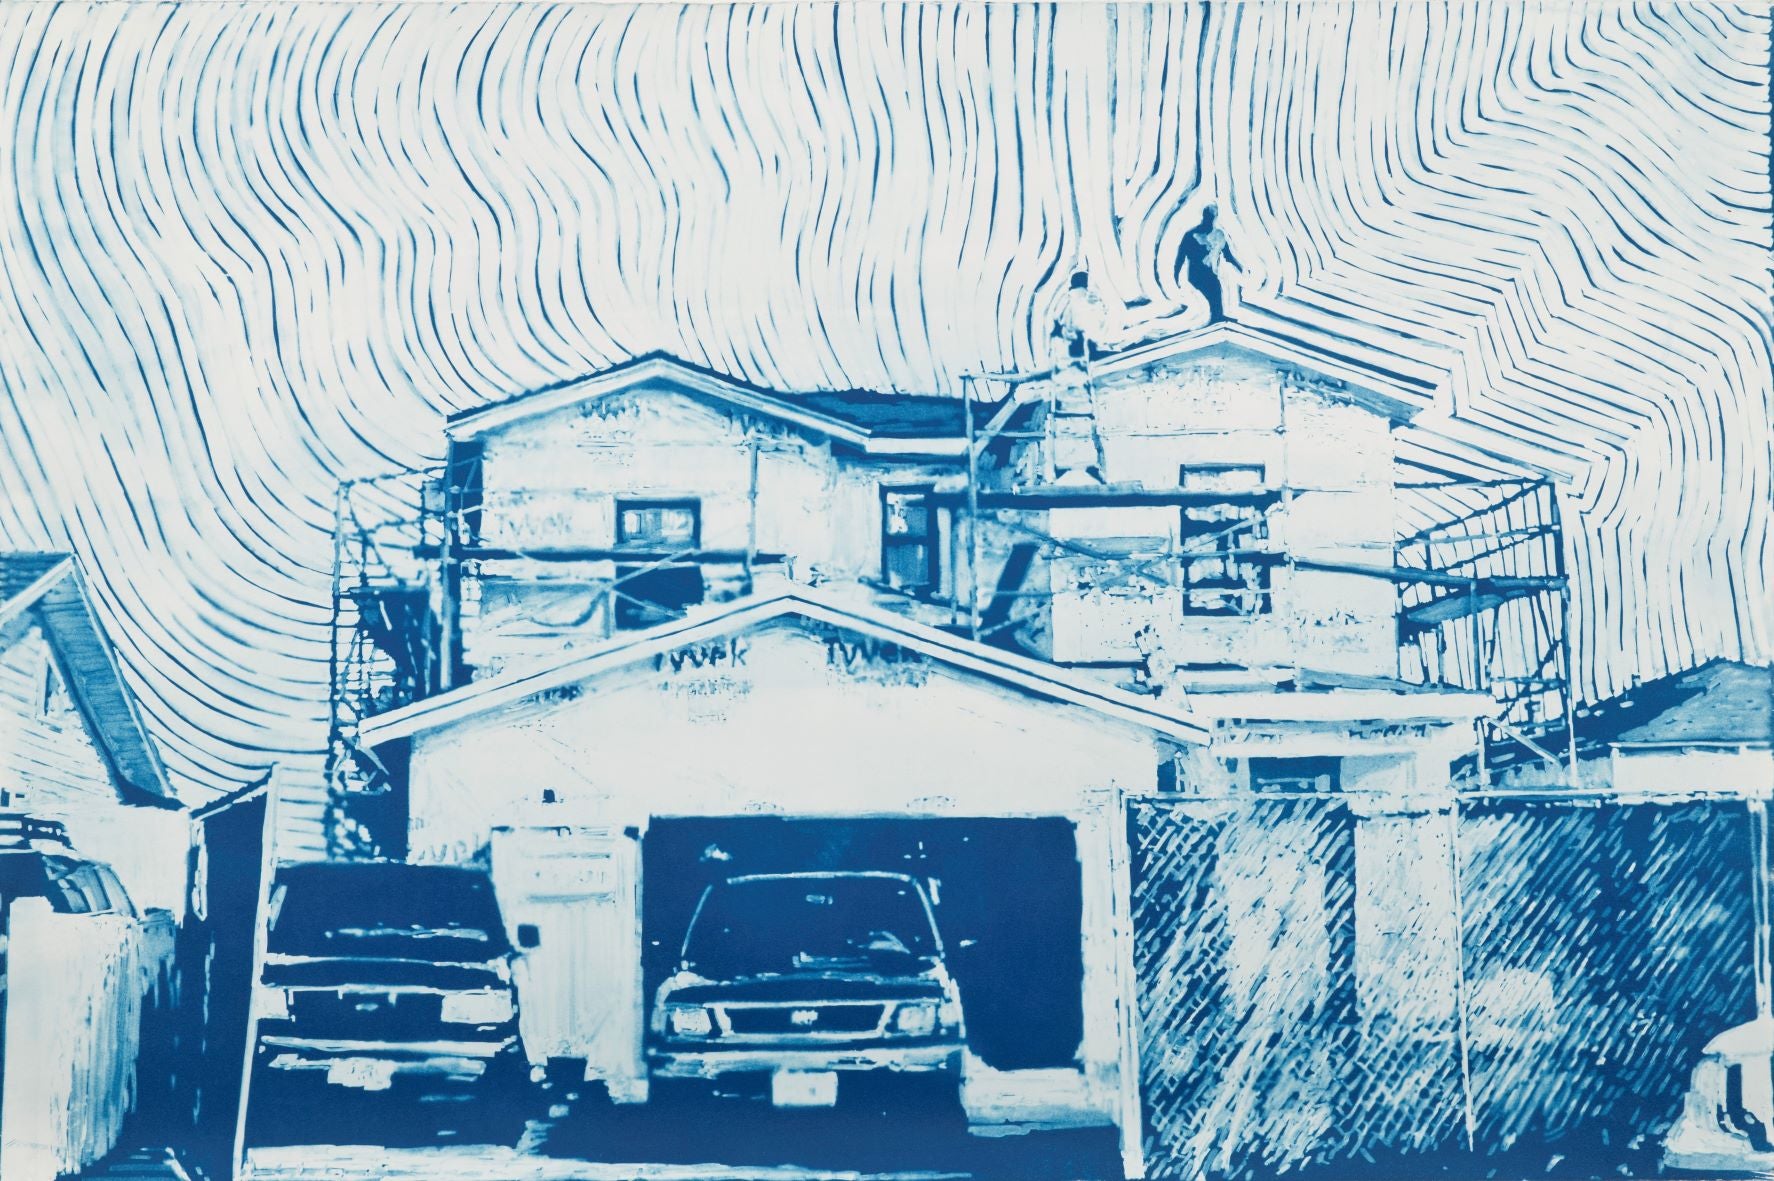 'GRAND VIEW- 2 TRUCKS, TWO WORKERS ON ROOF' - Cyanotype on Paper